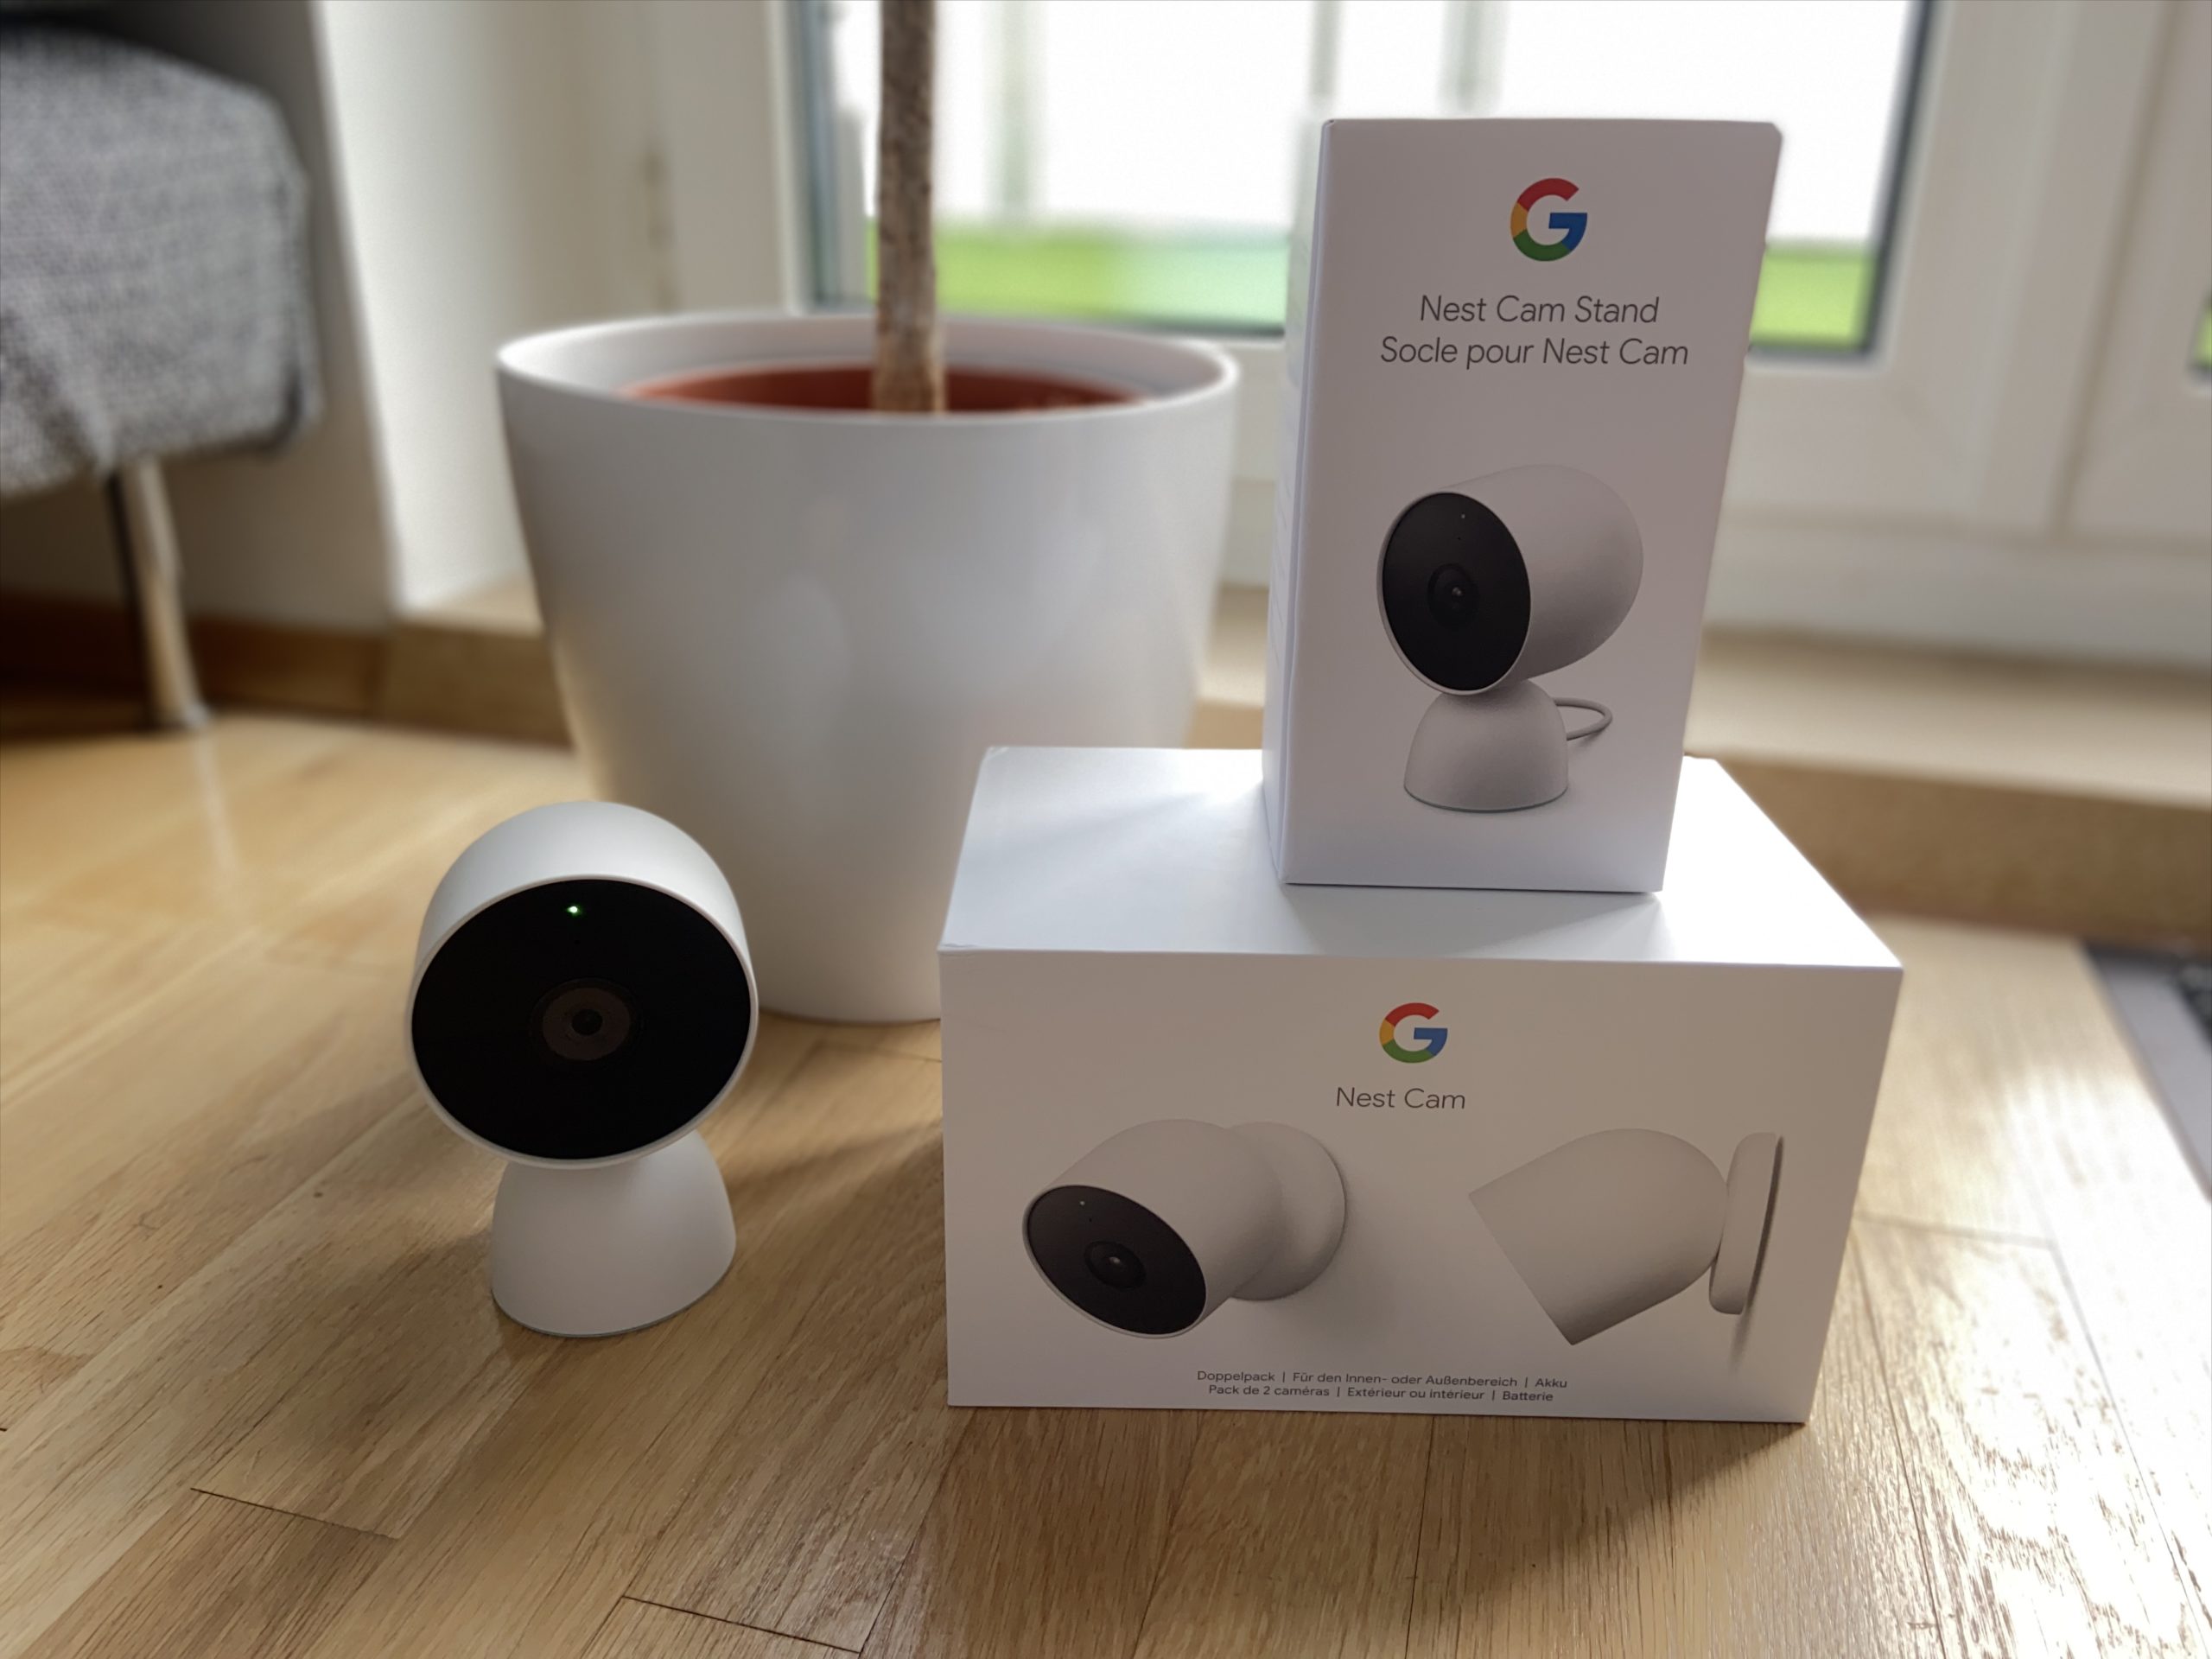 Google Nest Cam review: Easy to great benefit